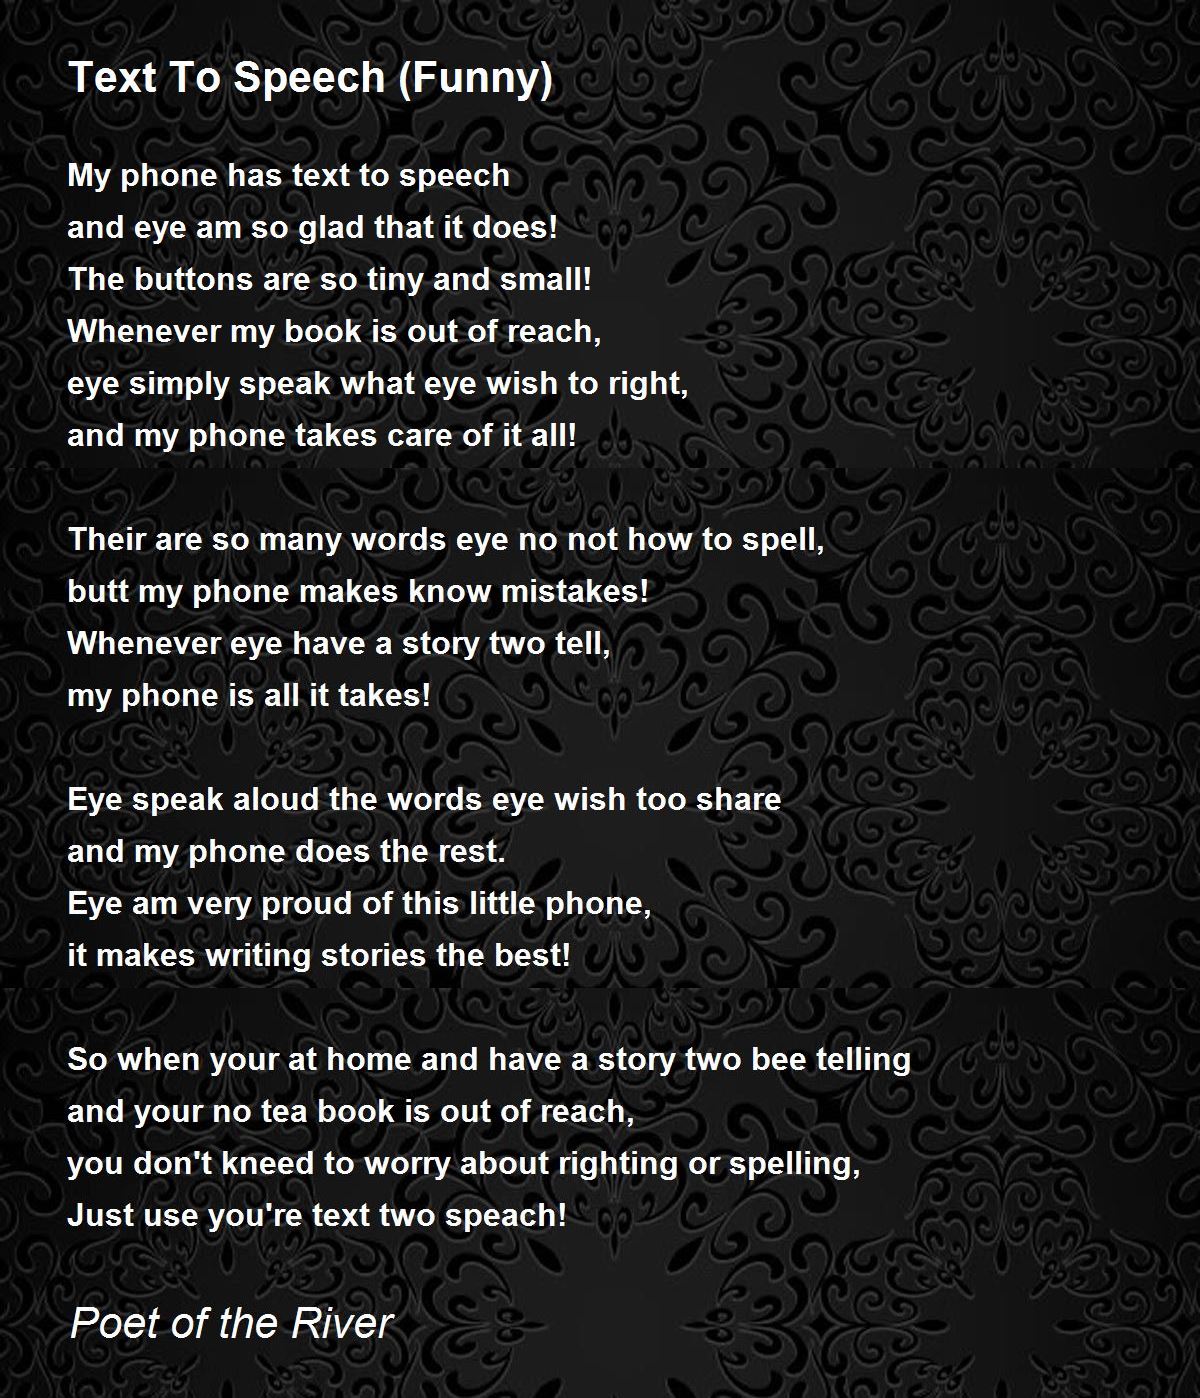 Text To Speech (Funny) - Text To Speech (Funny) Poem by Poet of the River